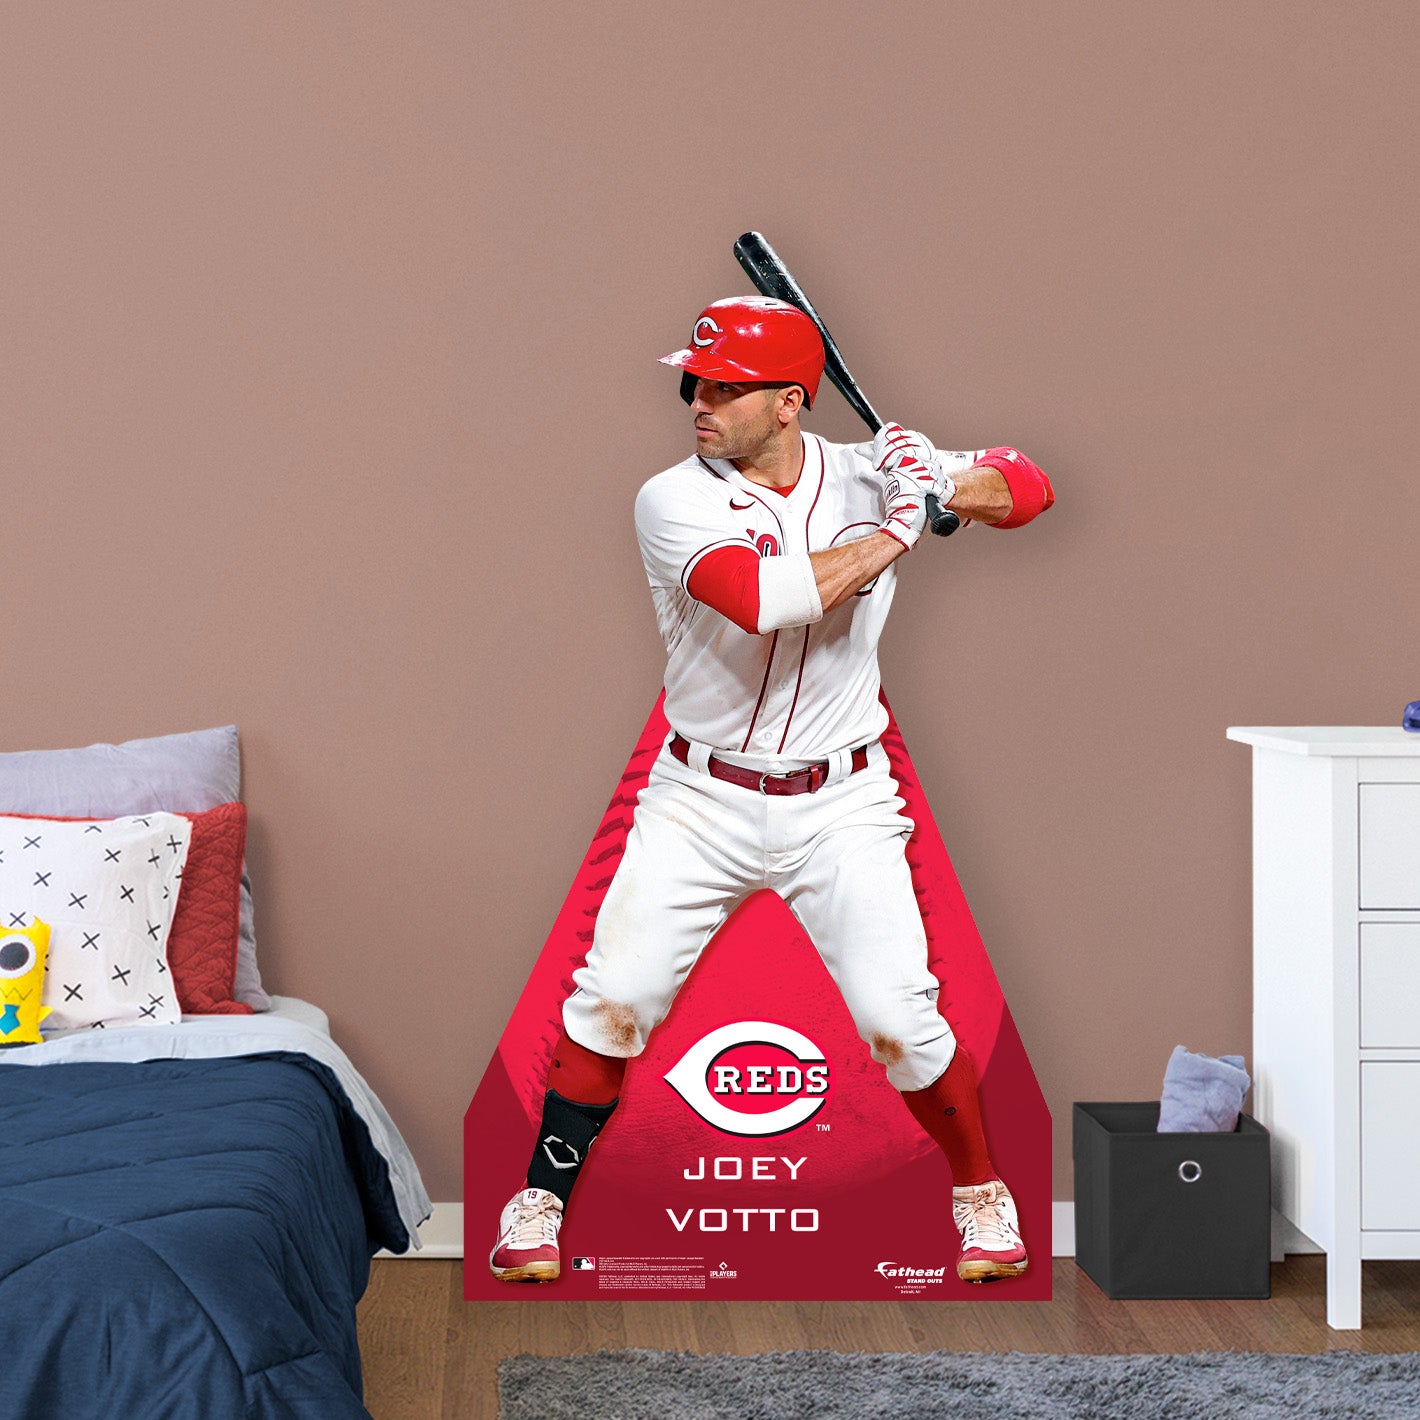 Cincinnati Reds: Joey Votto 2022  Life-Size   Foam Core Cutout  - Officially Licensed MLB    Stand Out